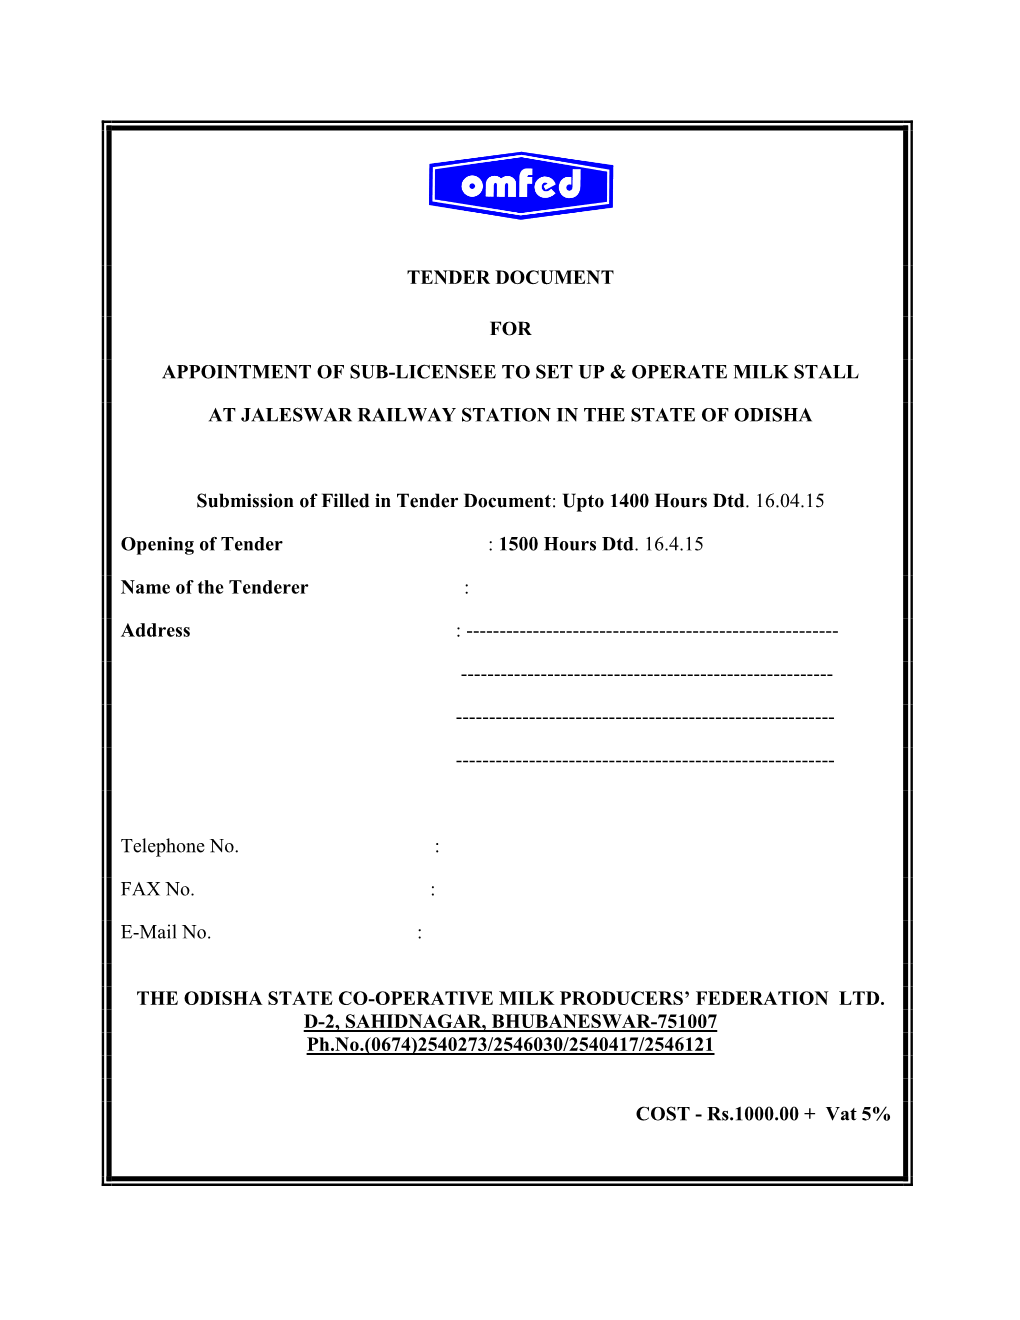 Tender Document for Appointment of Sub